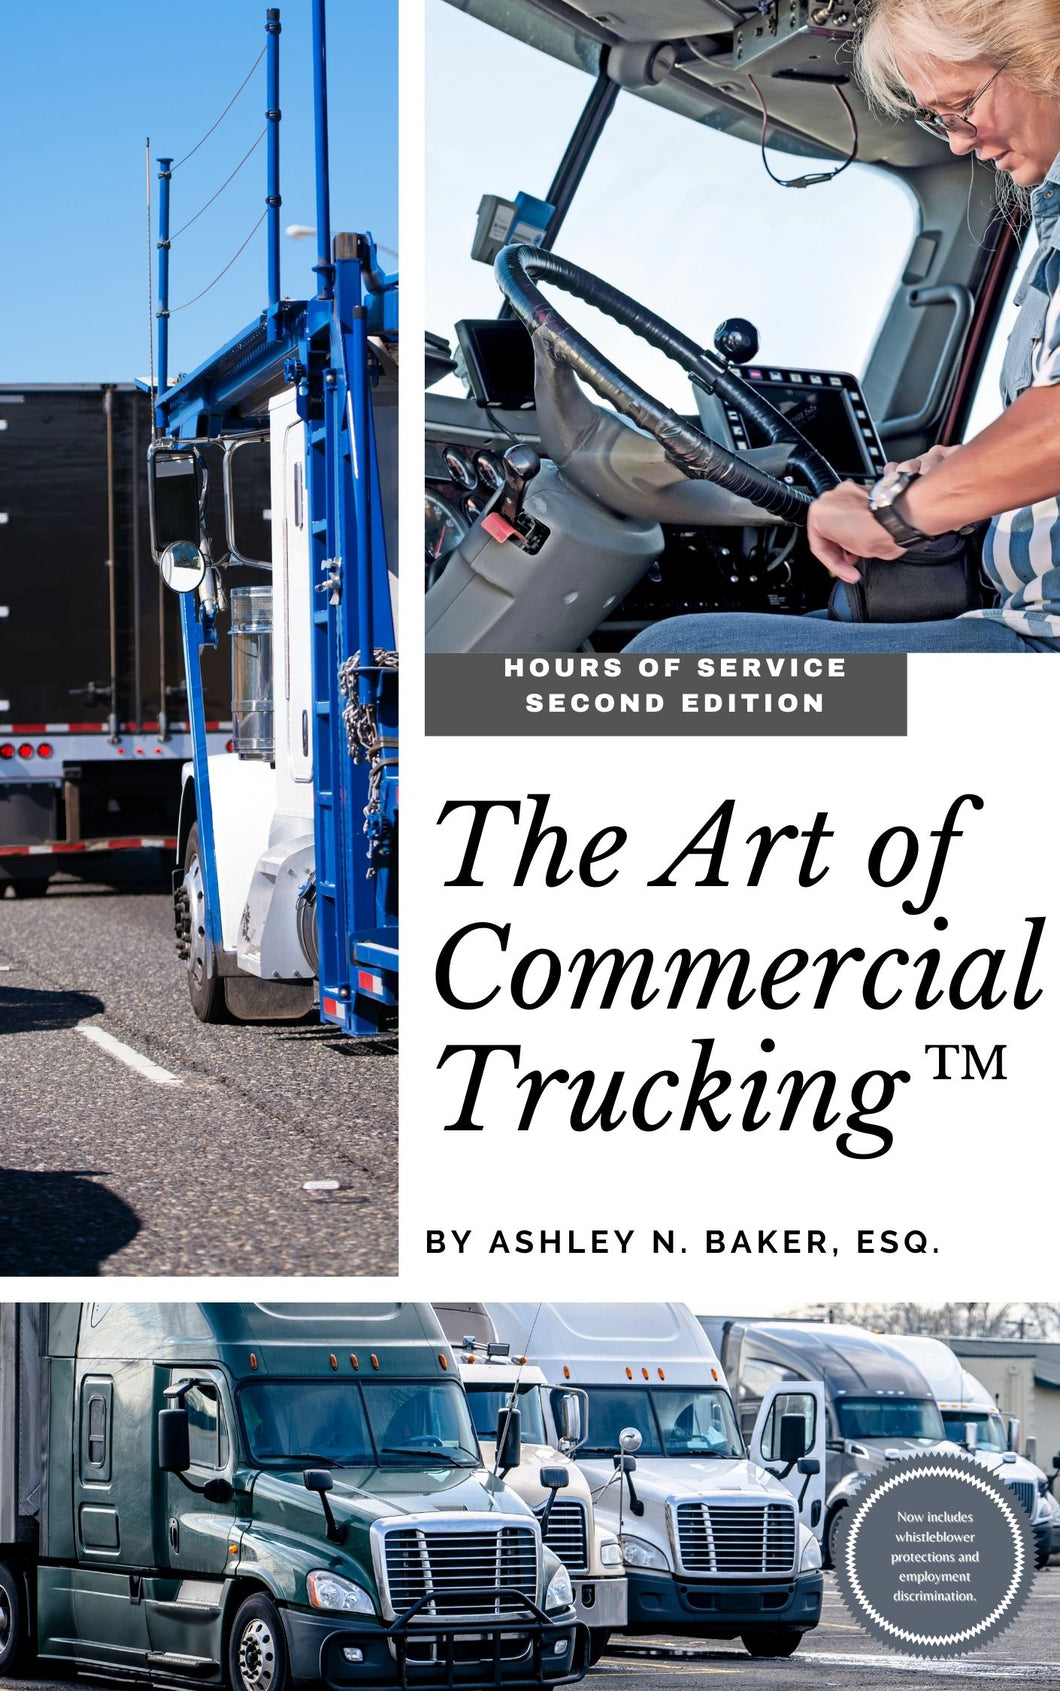 The Art of Commercial Trucking™: Hours of Service (2nd Edition)